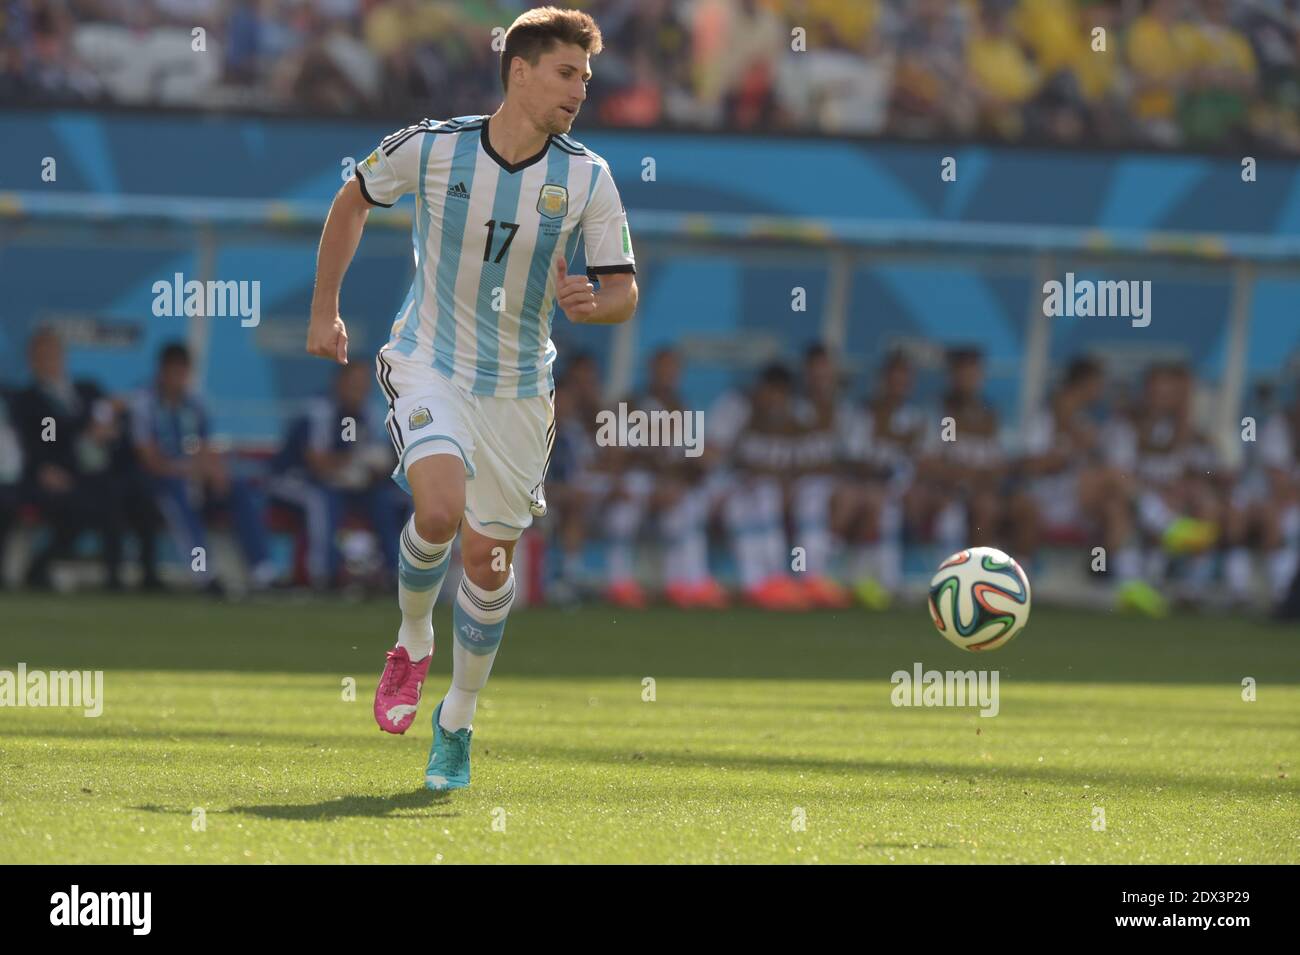 Argentina's Federico Fernandez in Soccer World Cup 2014 1/8 of Final round match Argentina vs Switzerland in Arena Stadium, Sao Paulo, Brasil on July 1st 2014. Argentina won 1-0 (after extra time). Photo by Henri Szwarc/ABACAPRESS.COM Stock Photo